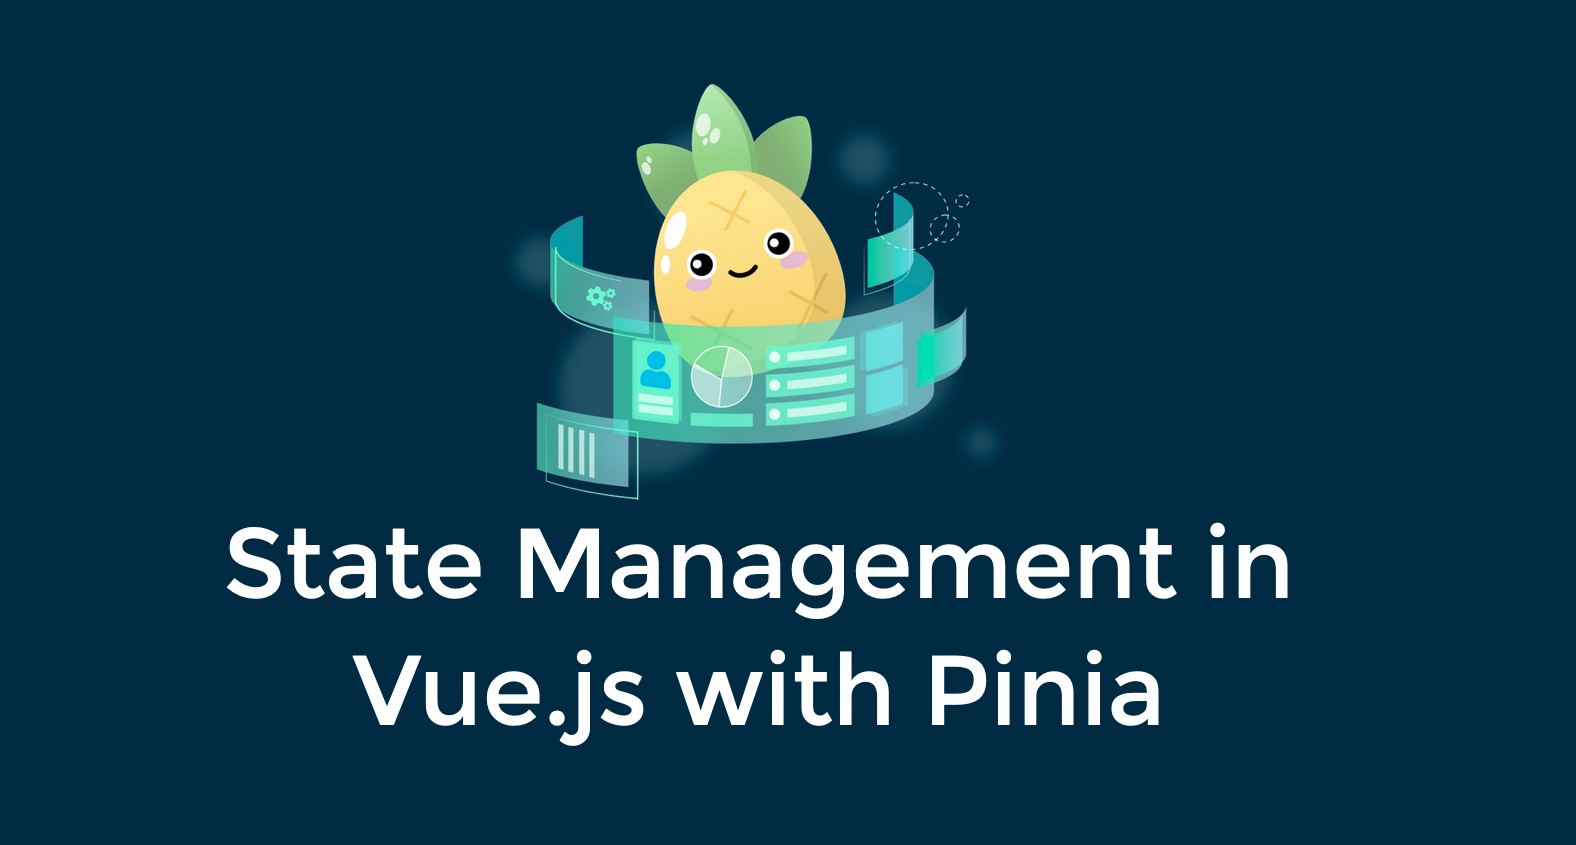 State Management in Vue.js with Pinia